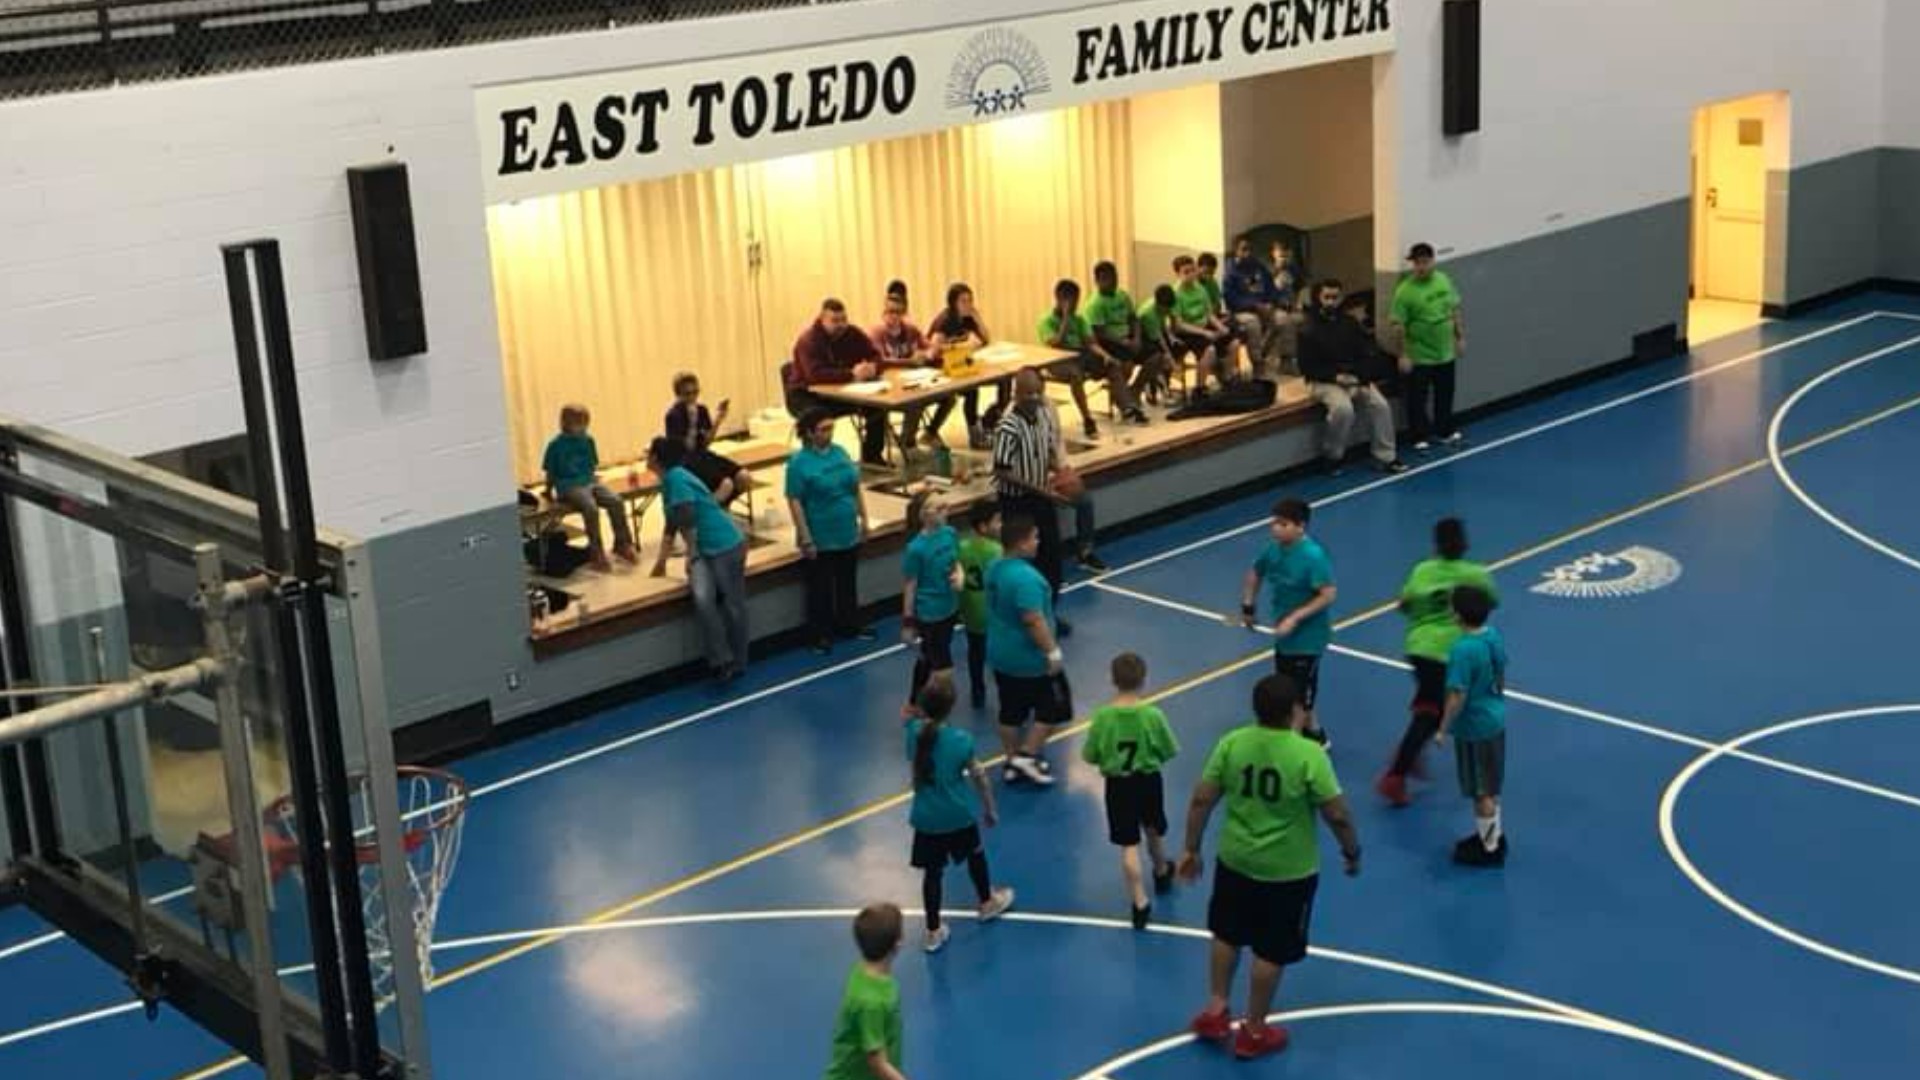 East Toledo's ZIP Code of 43605 is a sense of pride for people who live here. ETFC executive director Jodi Gross says the center helps fight an unfair perception.